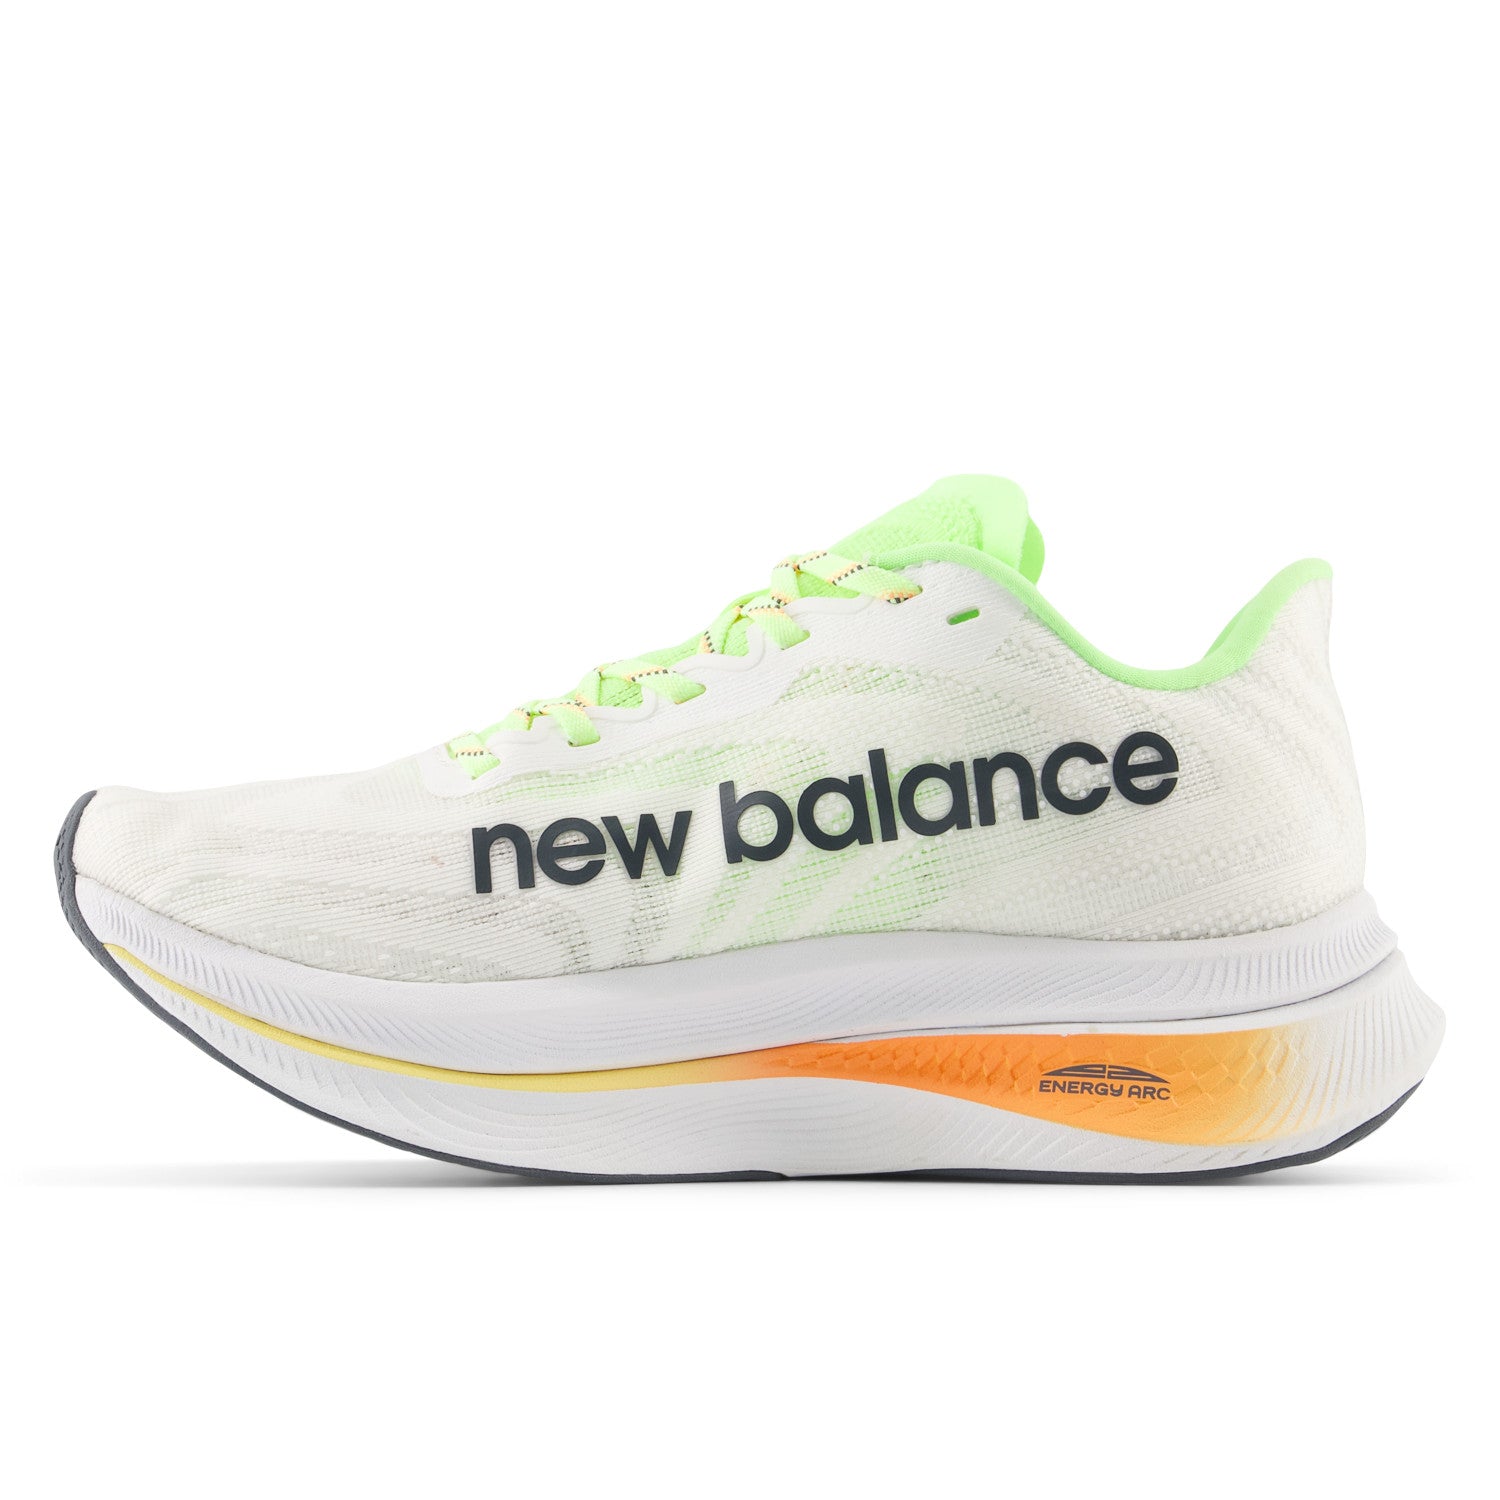 NEW BALANCE WOMEN'S FUELCELL SUPERCOMP TRAINER V2 - B - CA3 WHITE/BLEACHED LIME 